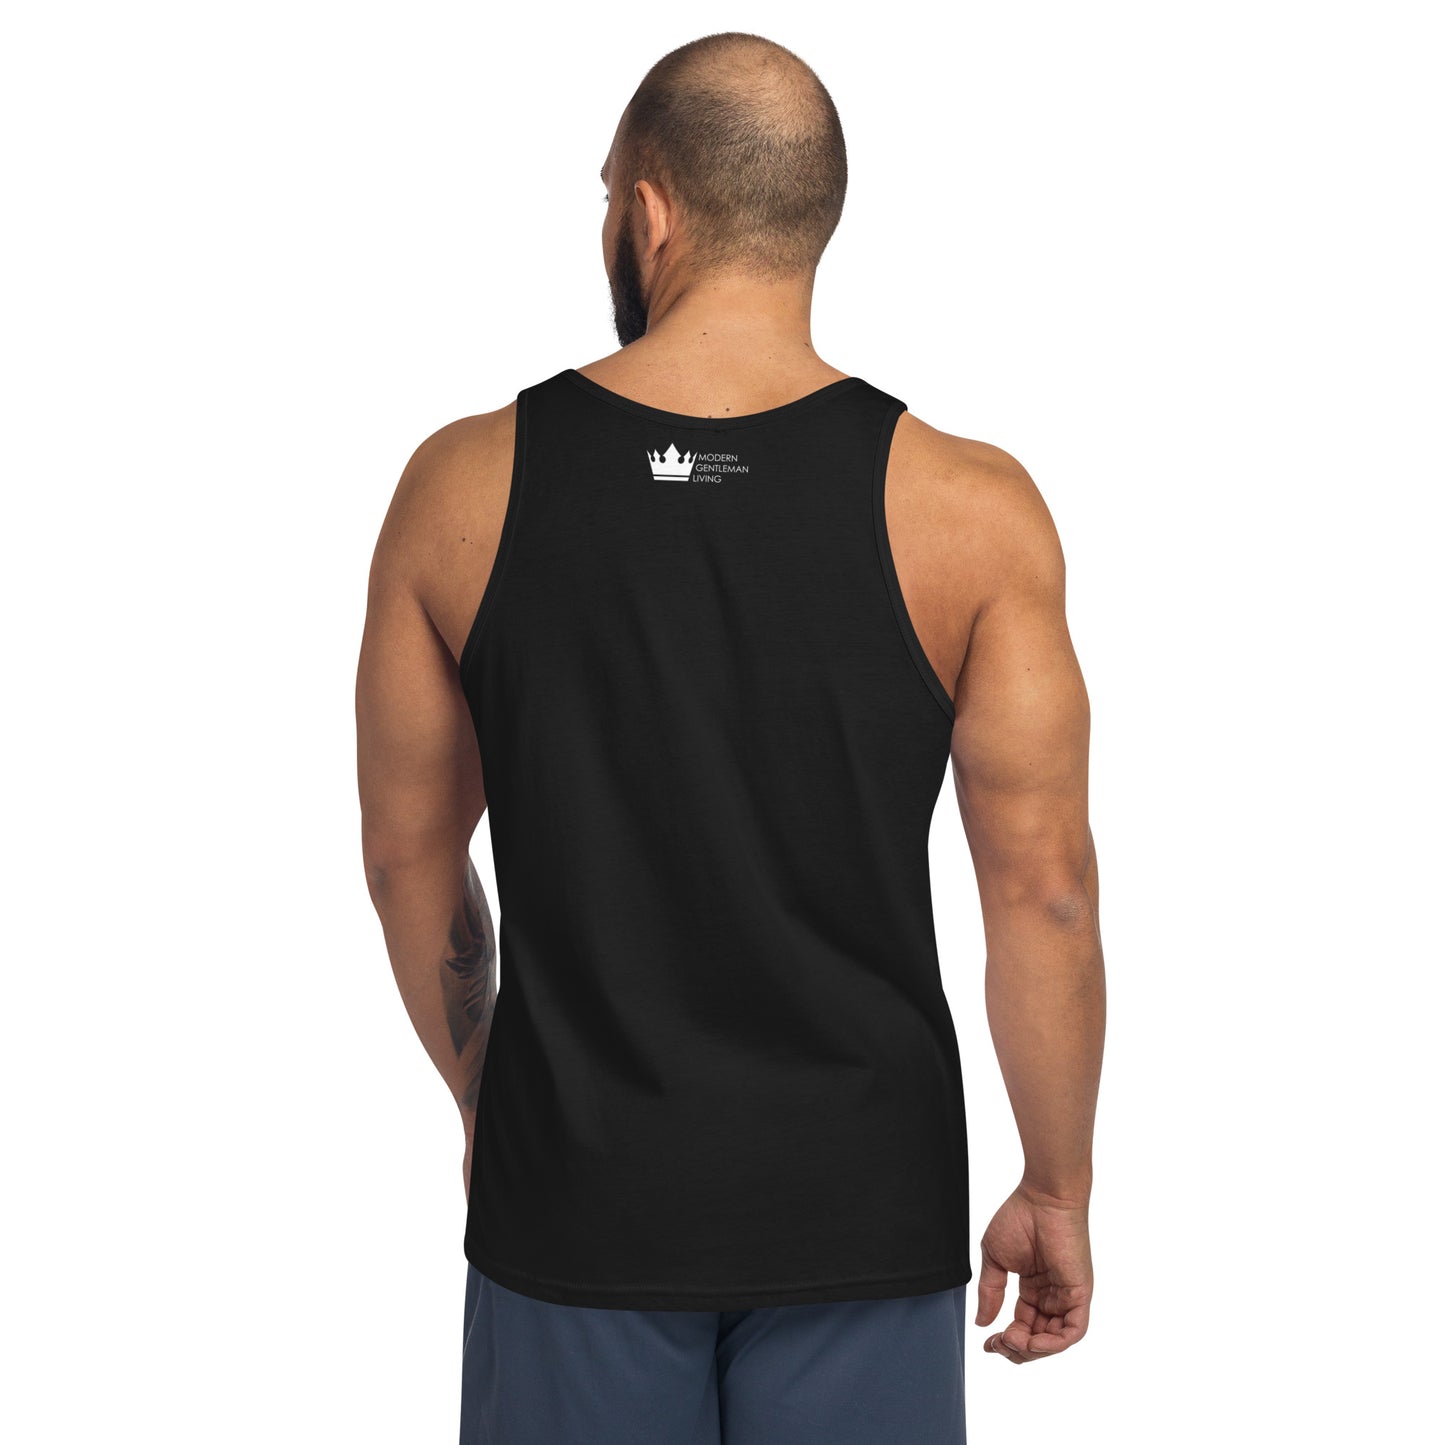 Whiskey, steak, cigars, freedom Workout Tank Top